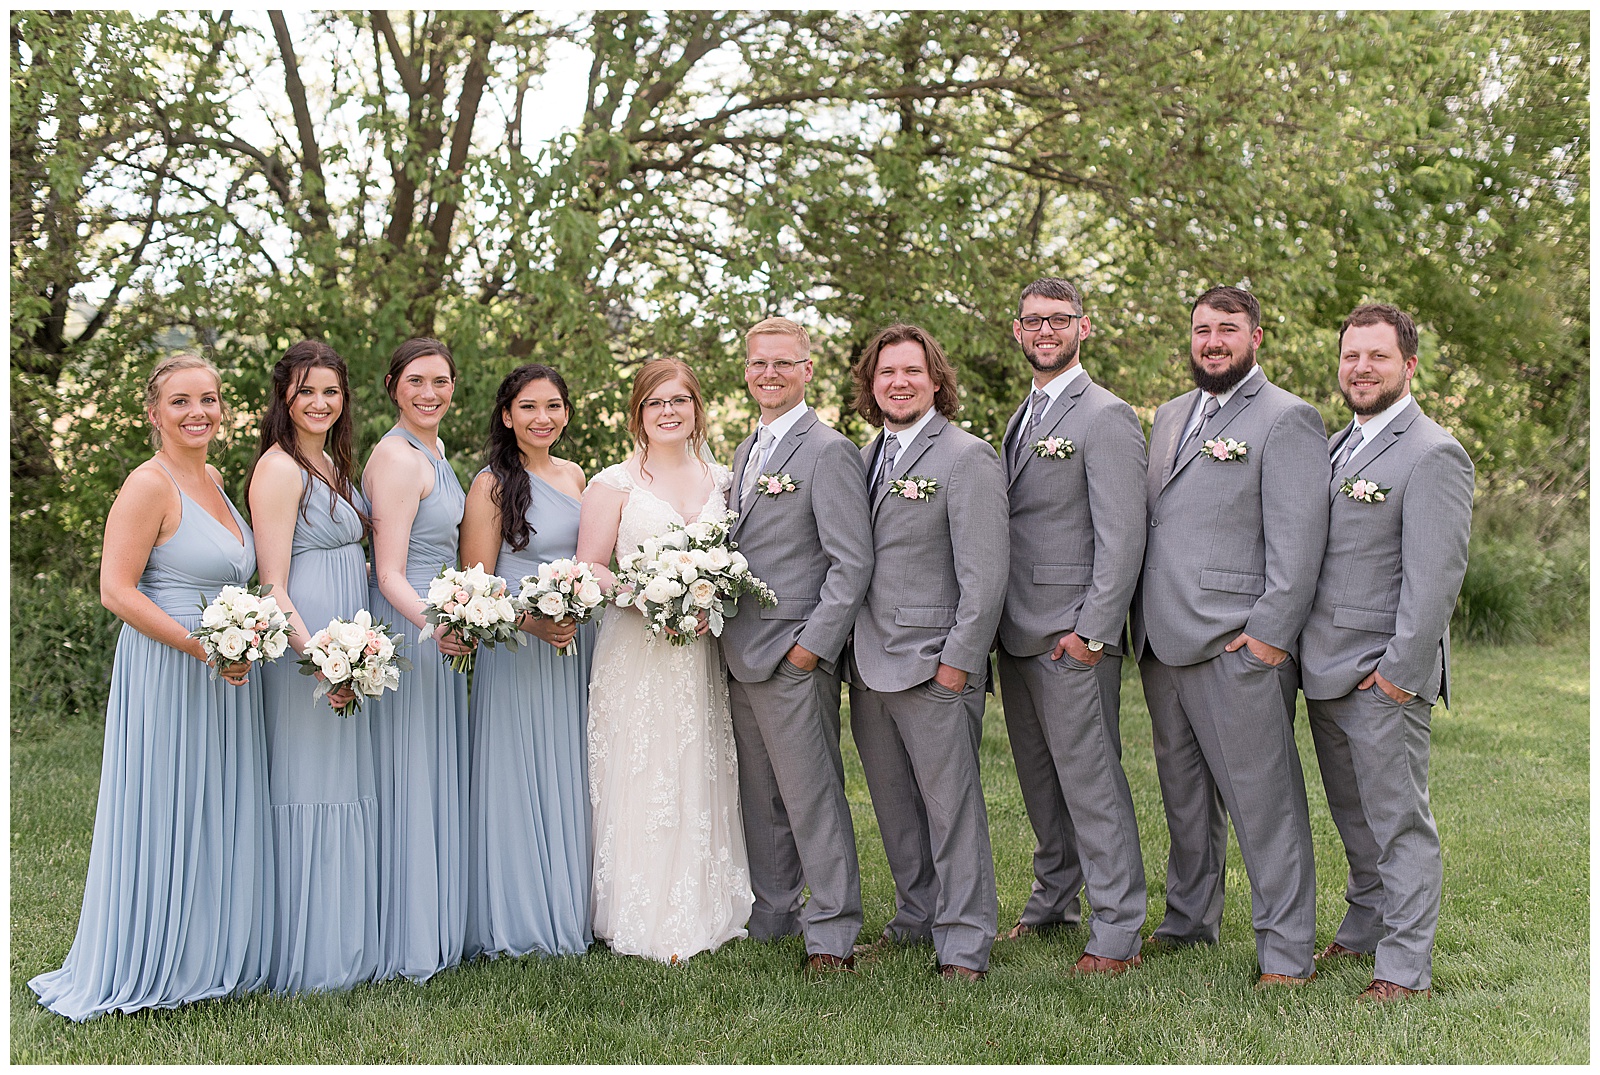 couple with bridal party and bridesmaids wearing light blue dresses and groomsmen wearing gray suits